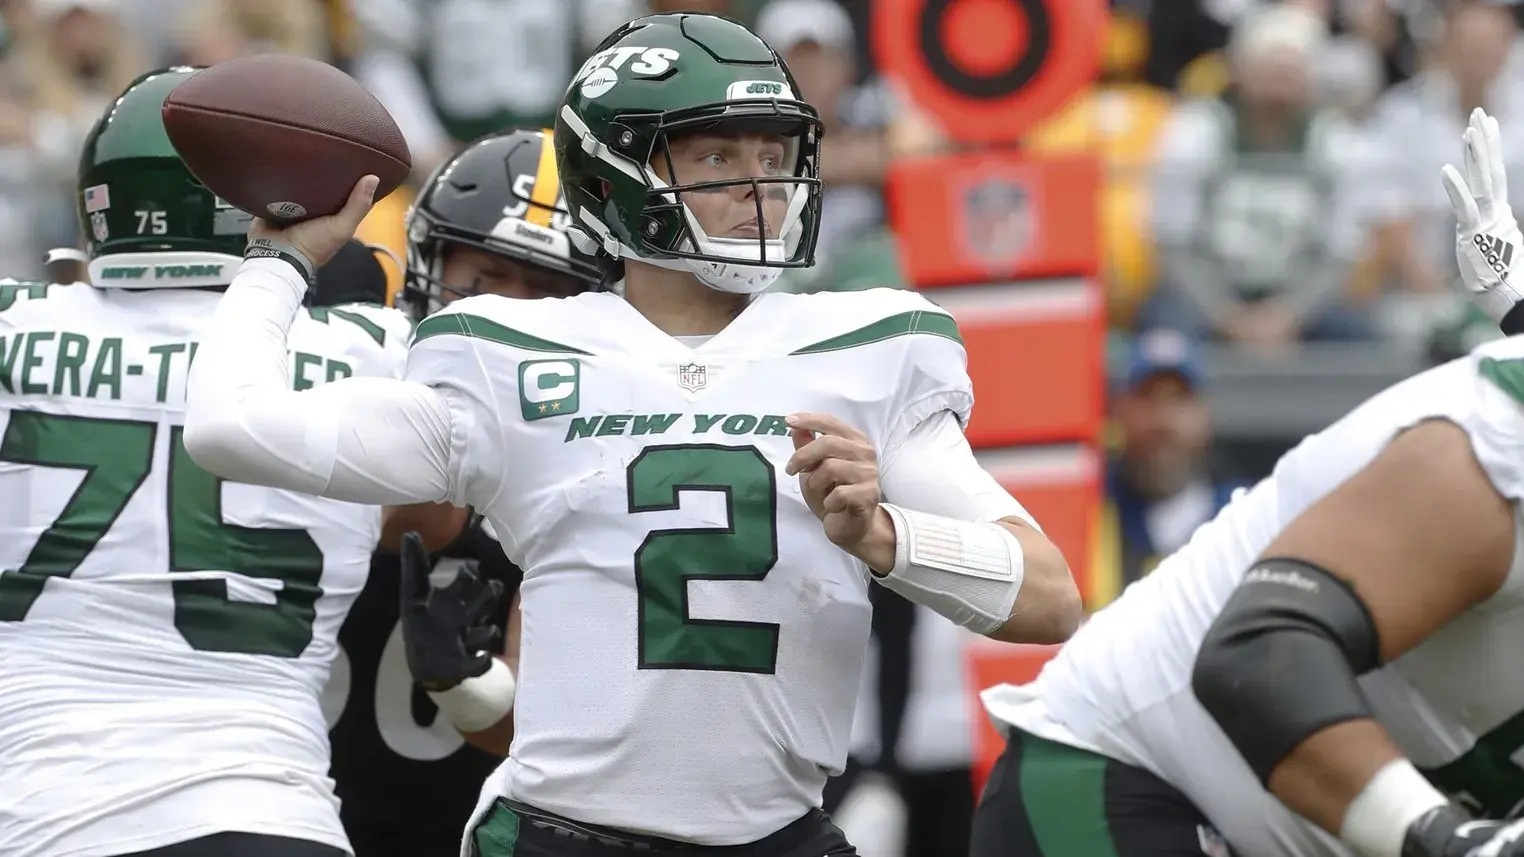 Oct 2, 2022; Pittsburgh, Pennsylvania, USA; New York Jets quarterback Zach Wilson (2) passes against the Pittsburgh Steelers during the first quarter at Acrisure Stadium. / Charles LeClaire-USA TODAY Sports